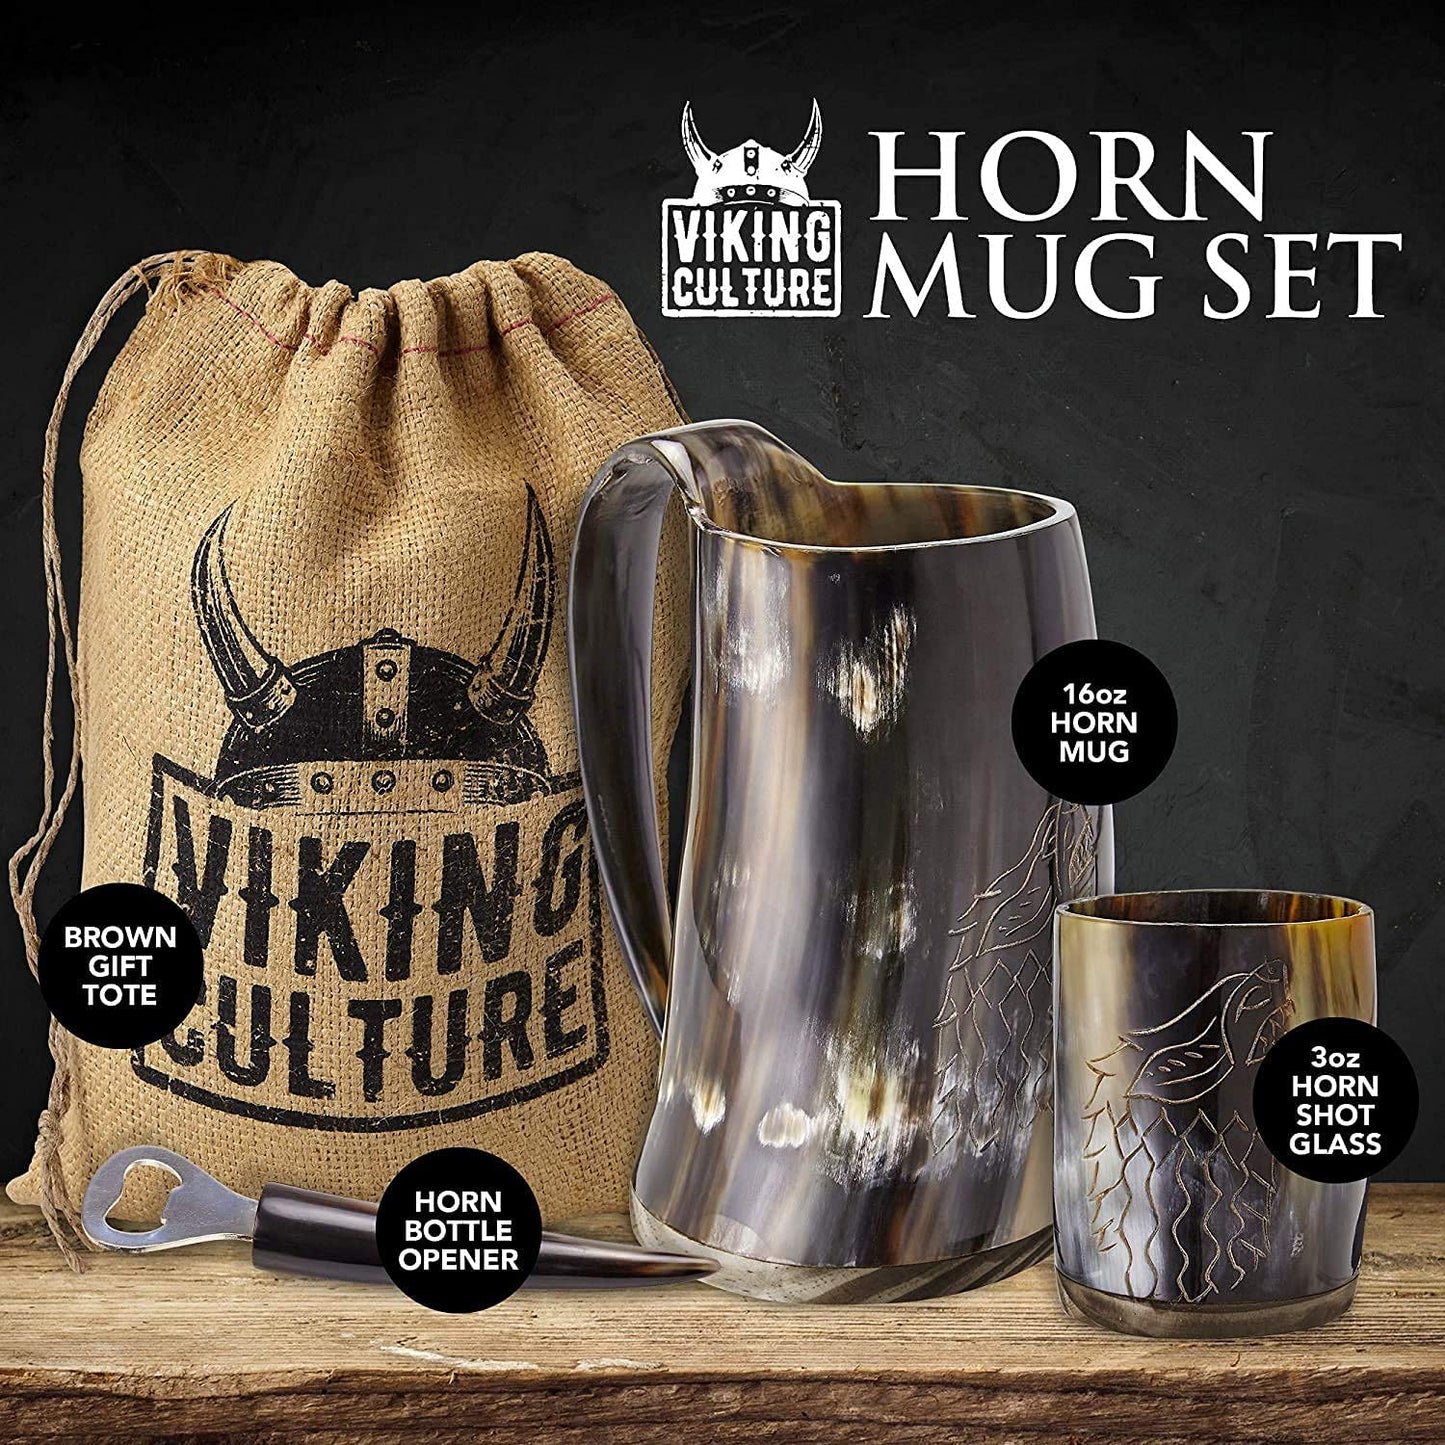 A Viking beer mug set which includes a horn mug, horn shot glass, horn bottle opener and a brown gift tote.